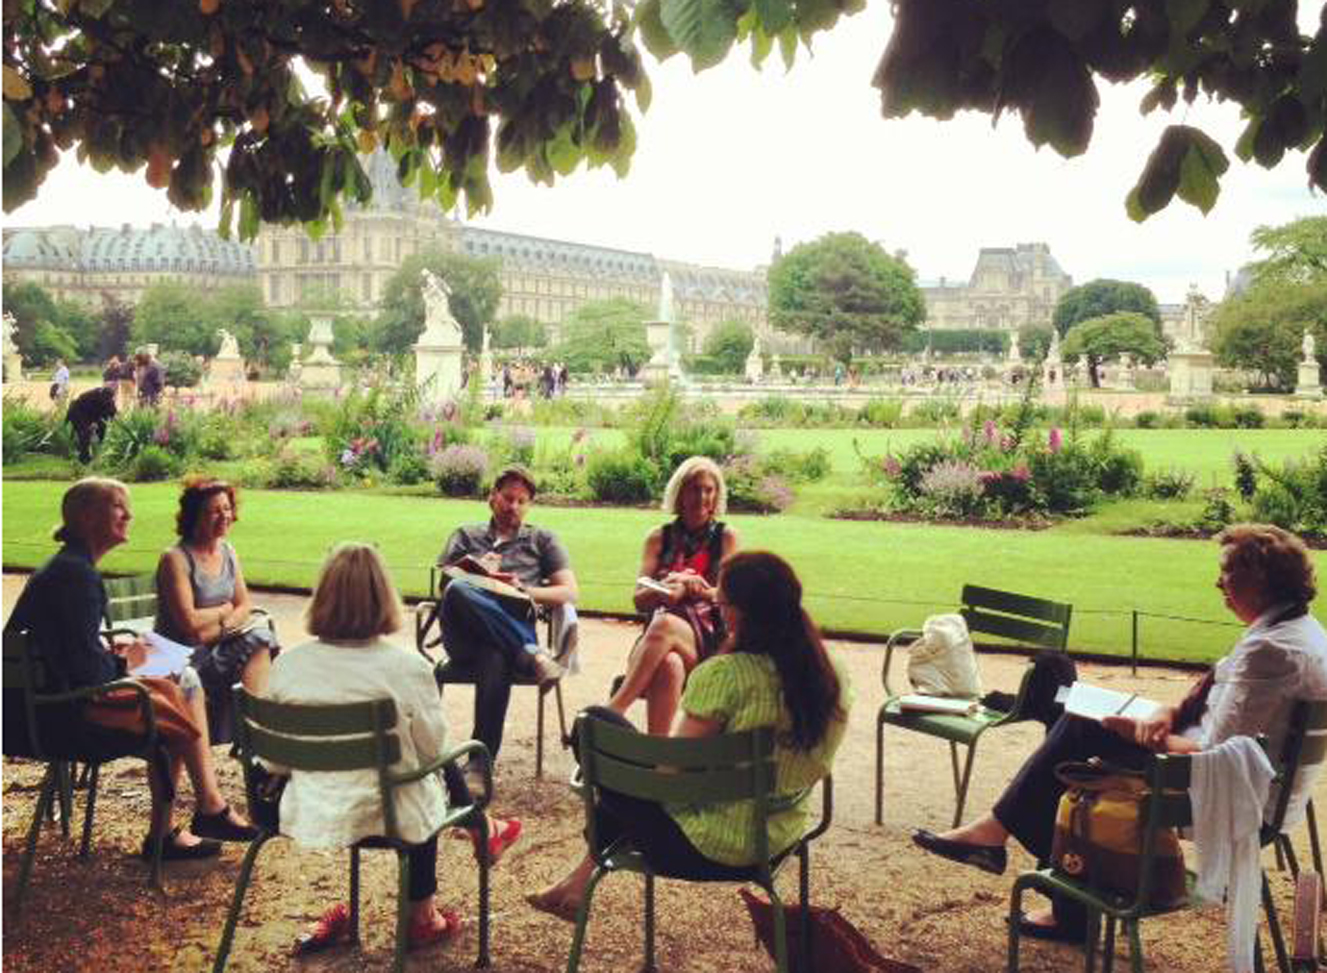 The Left Bank Writers Retreat in Paris holds daily writing workshops in inspirational settings for its small group of literary travelers; discounted registration is a perfect holiday gift for writers.